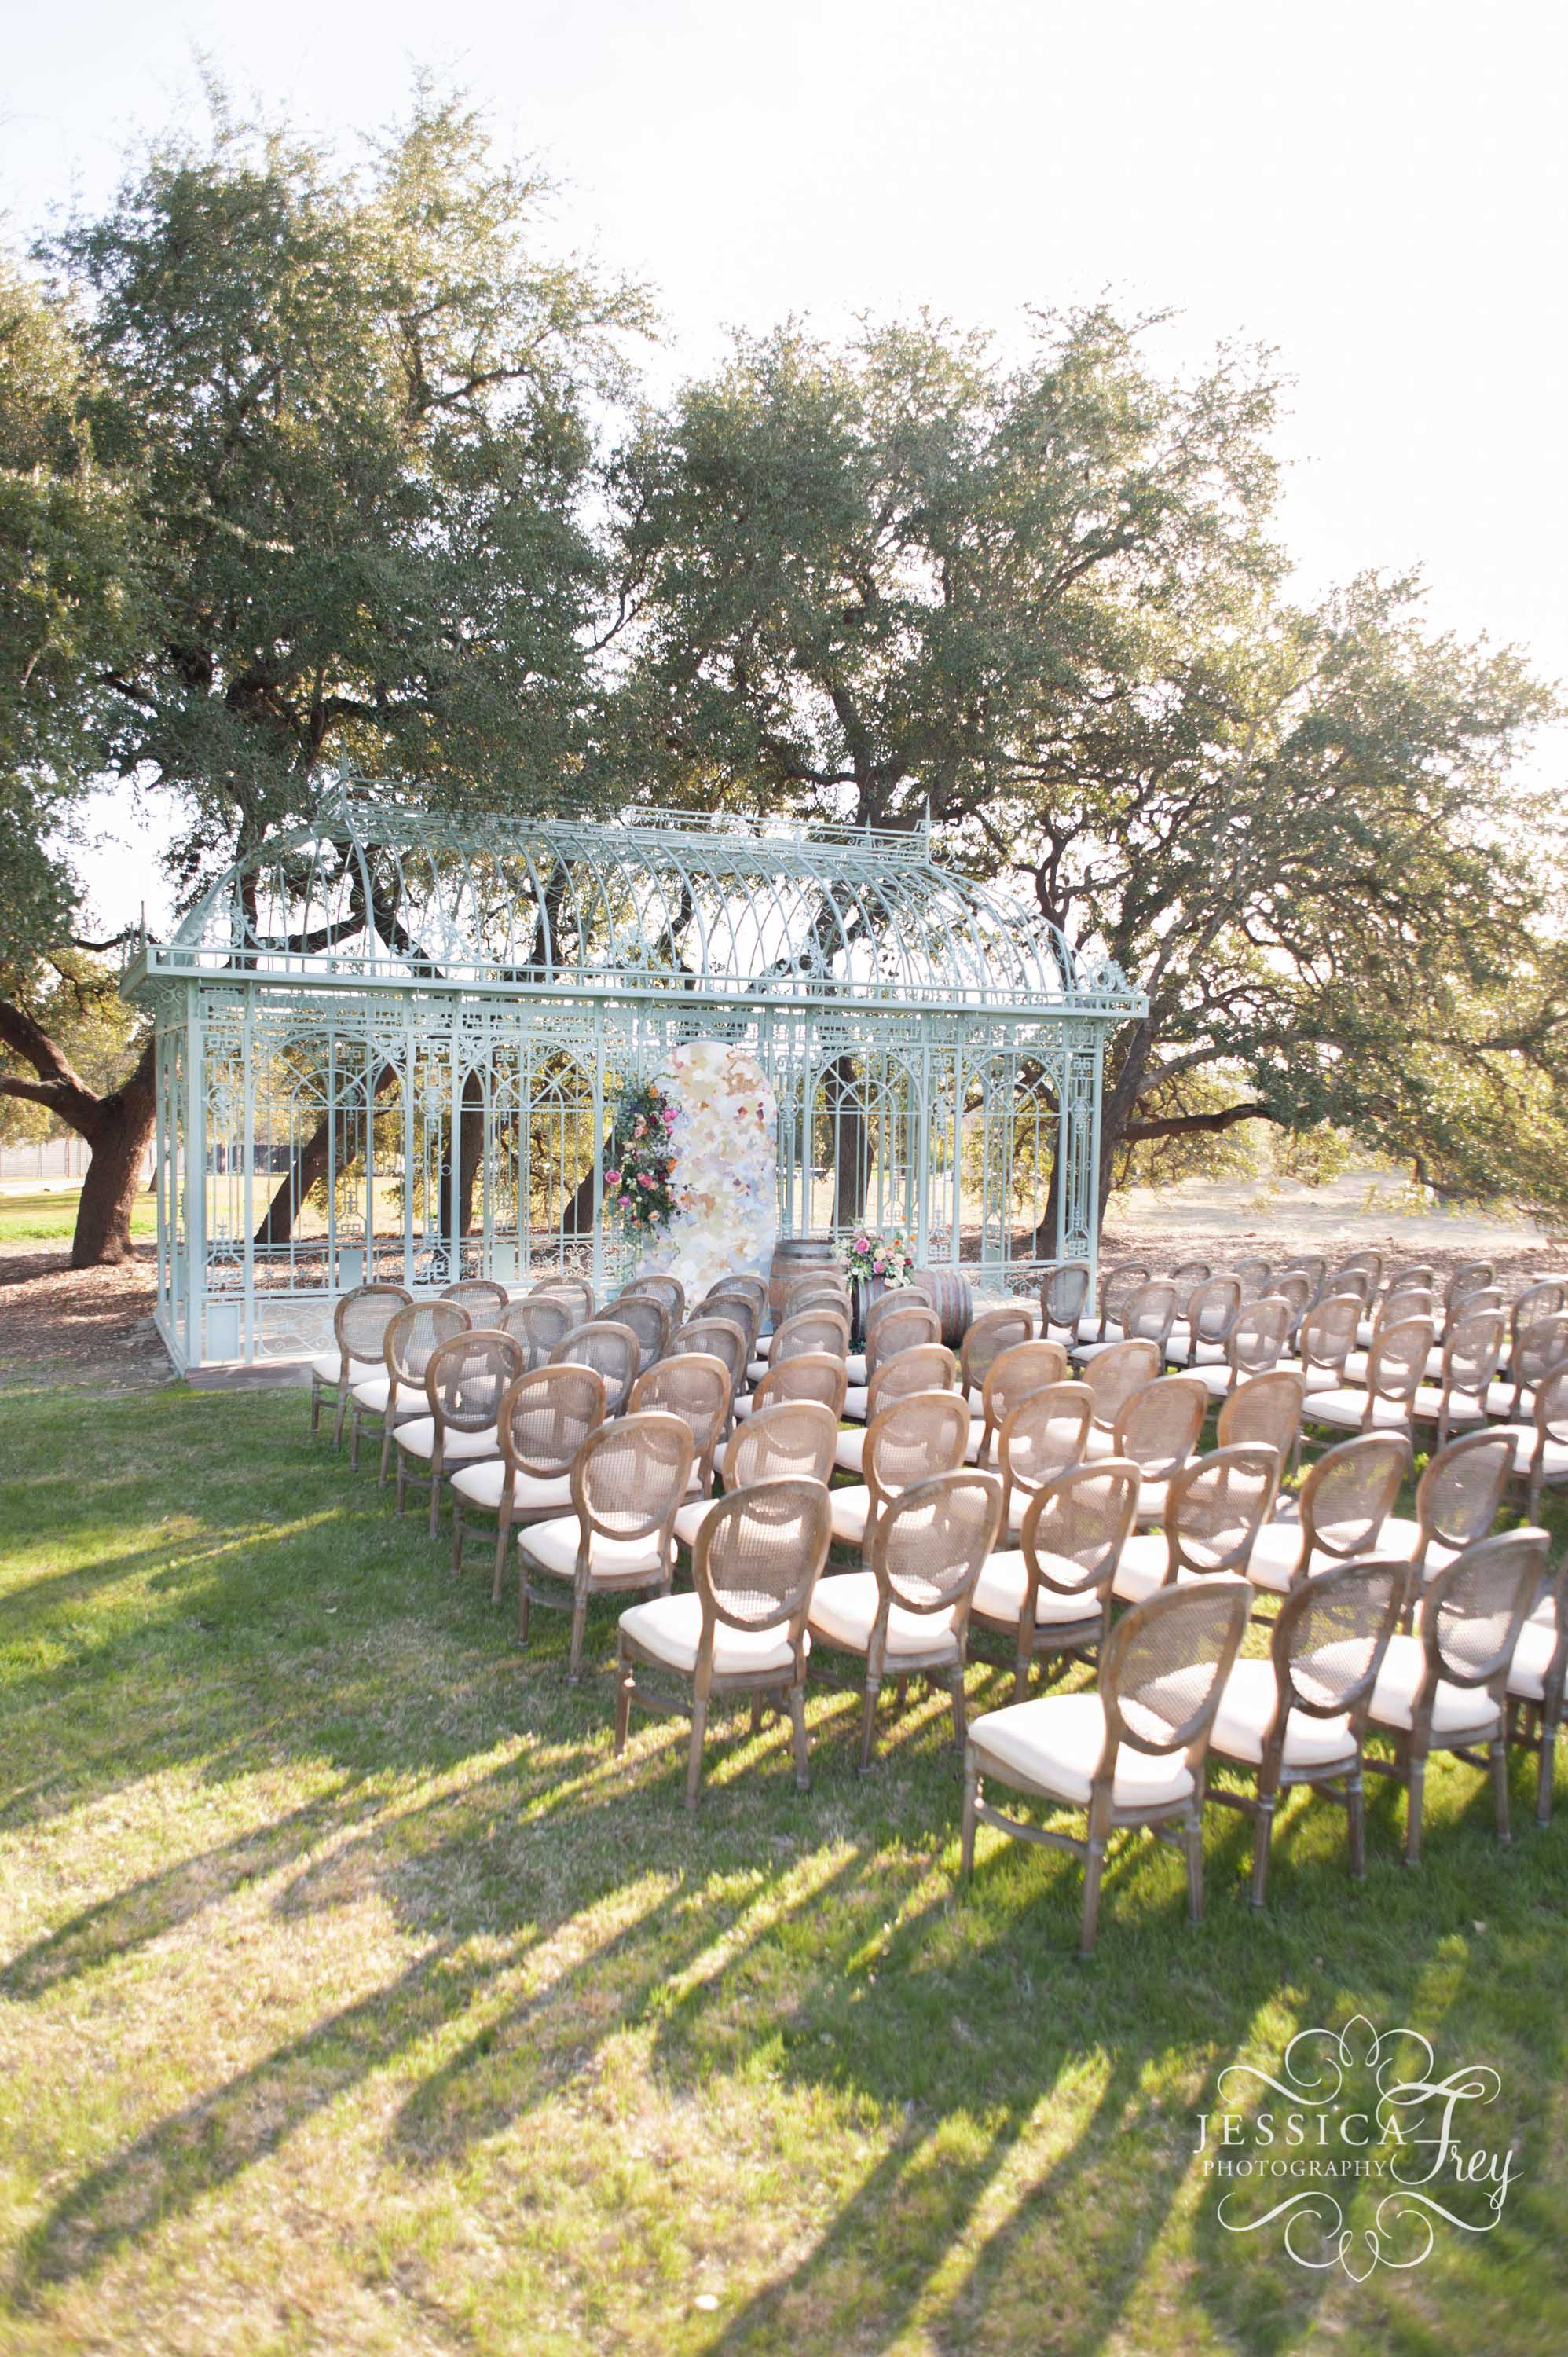 The Green Cathedral wedding venue in Dripping Springs Texas